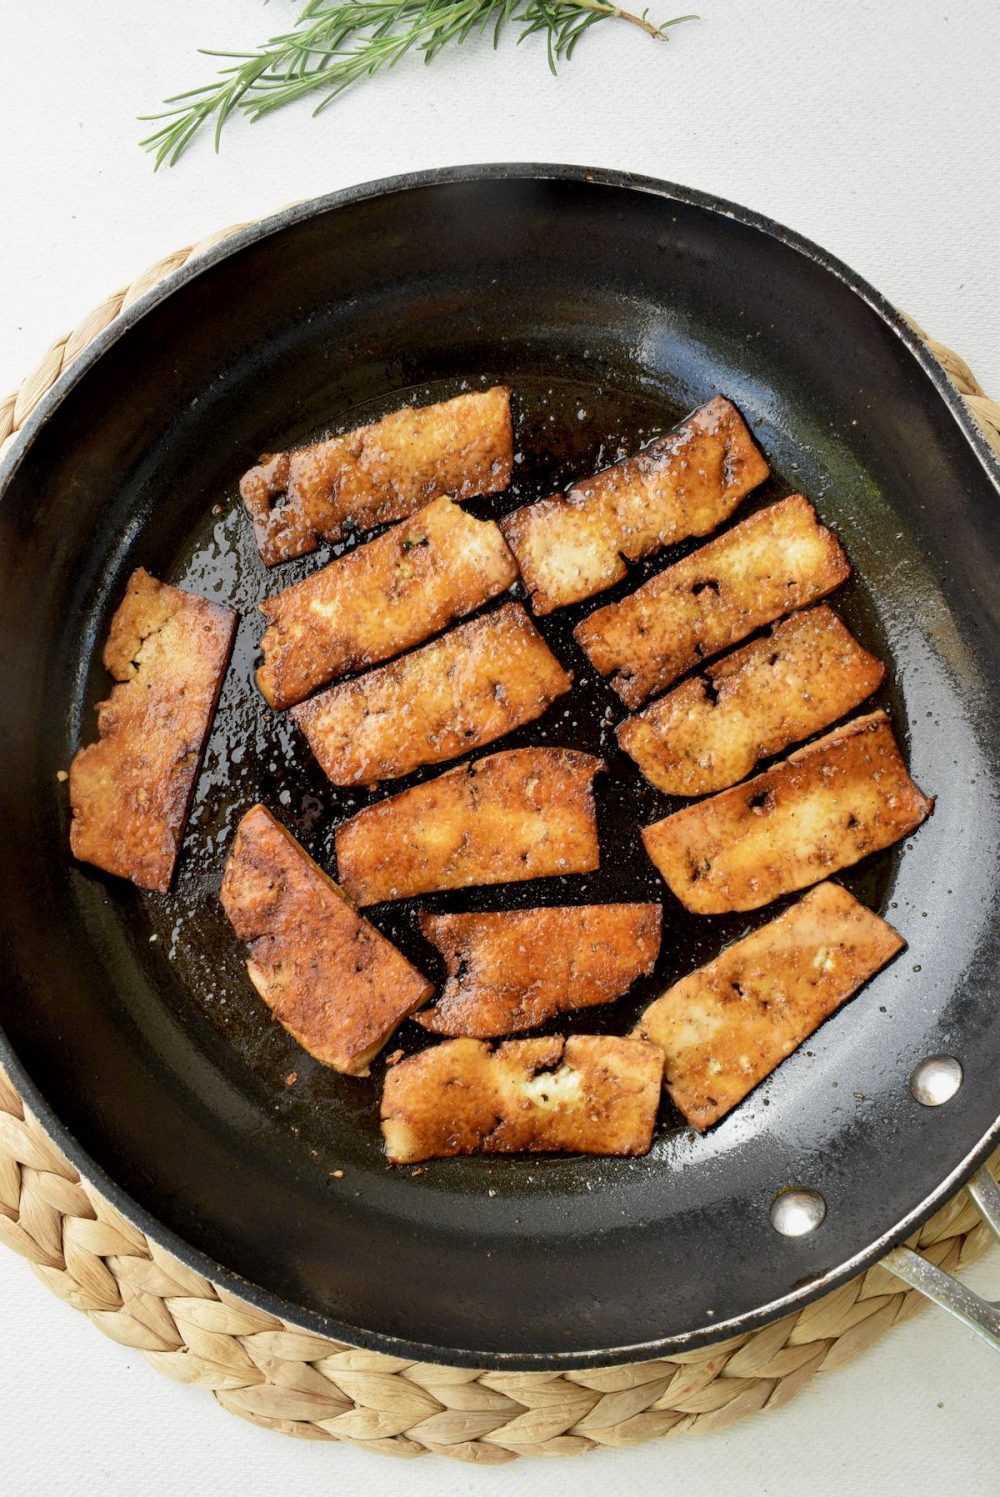 Slices of brown fried tofu in a large frying pan.